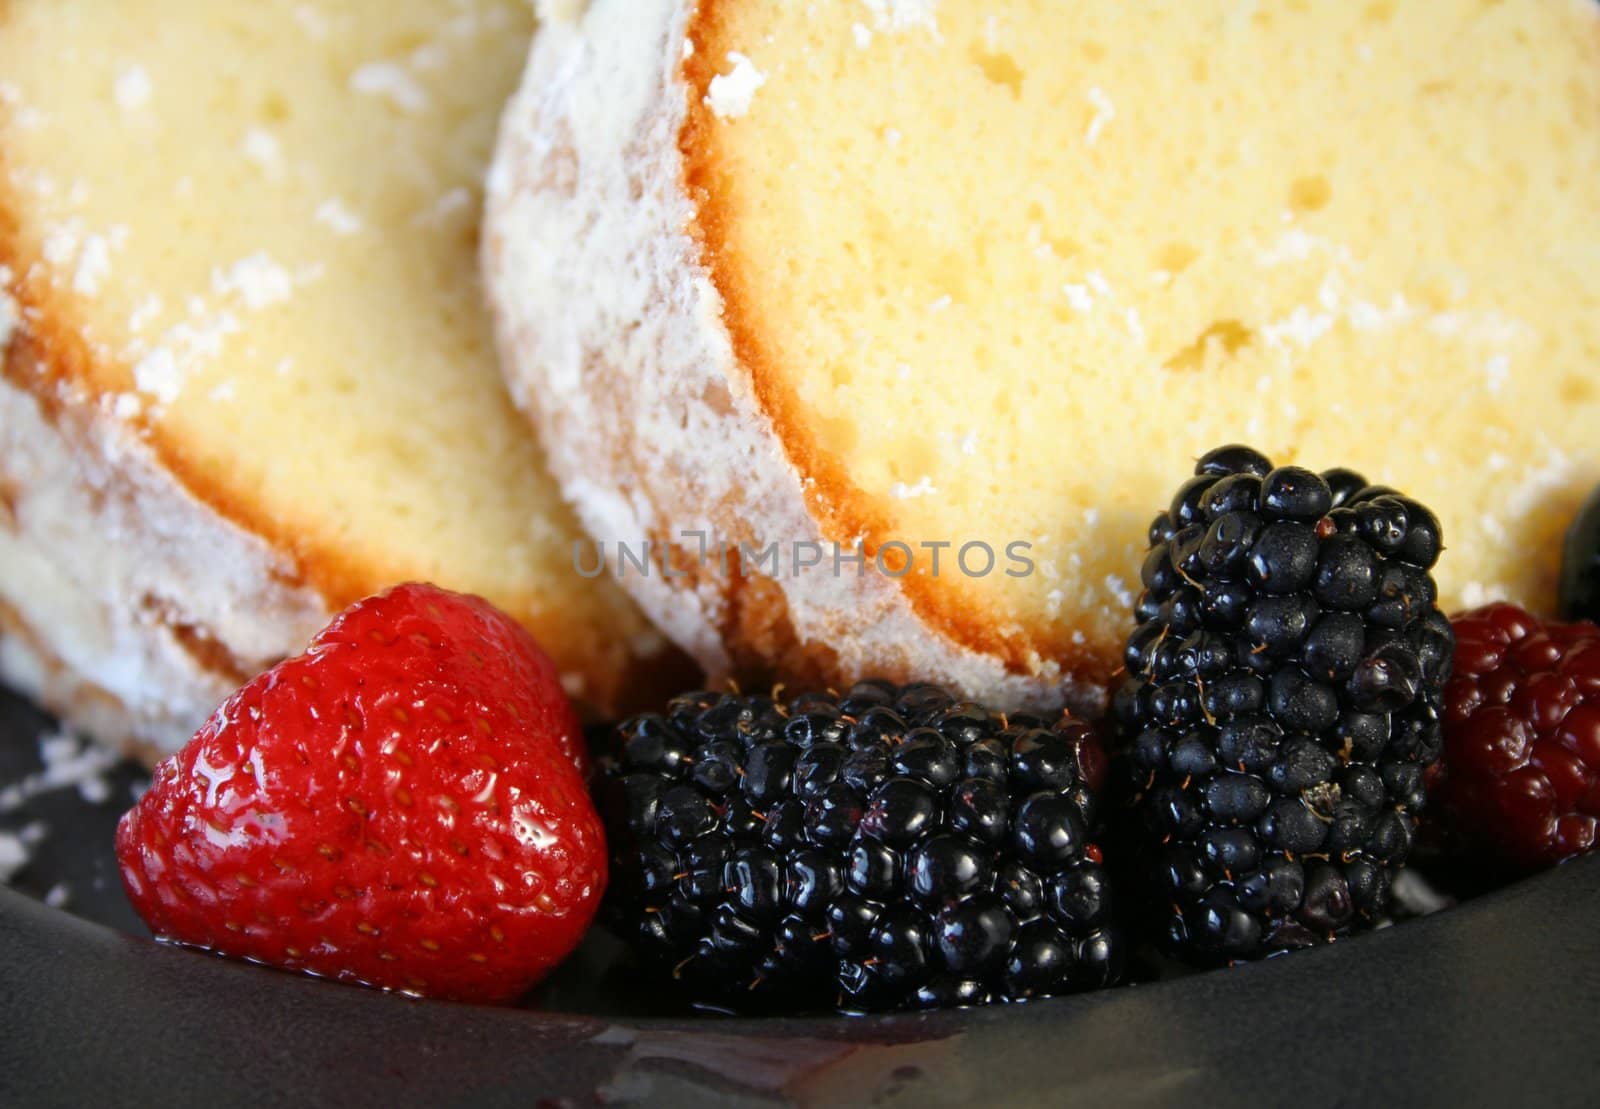 Pound Cake and Fruit by thephotoguy